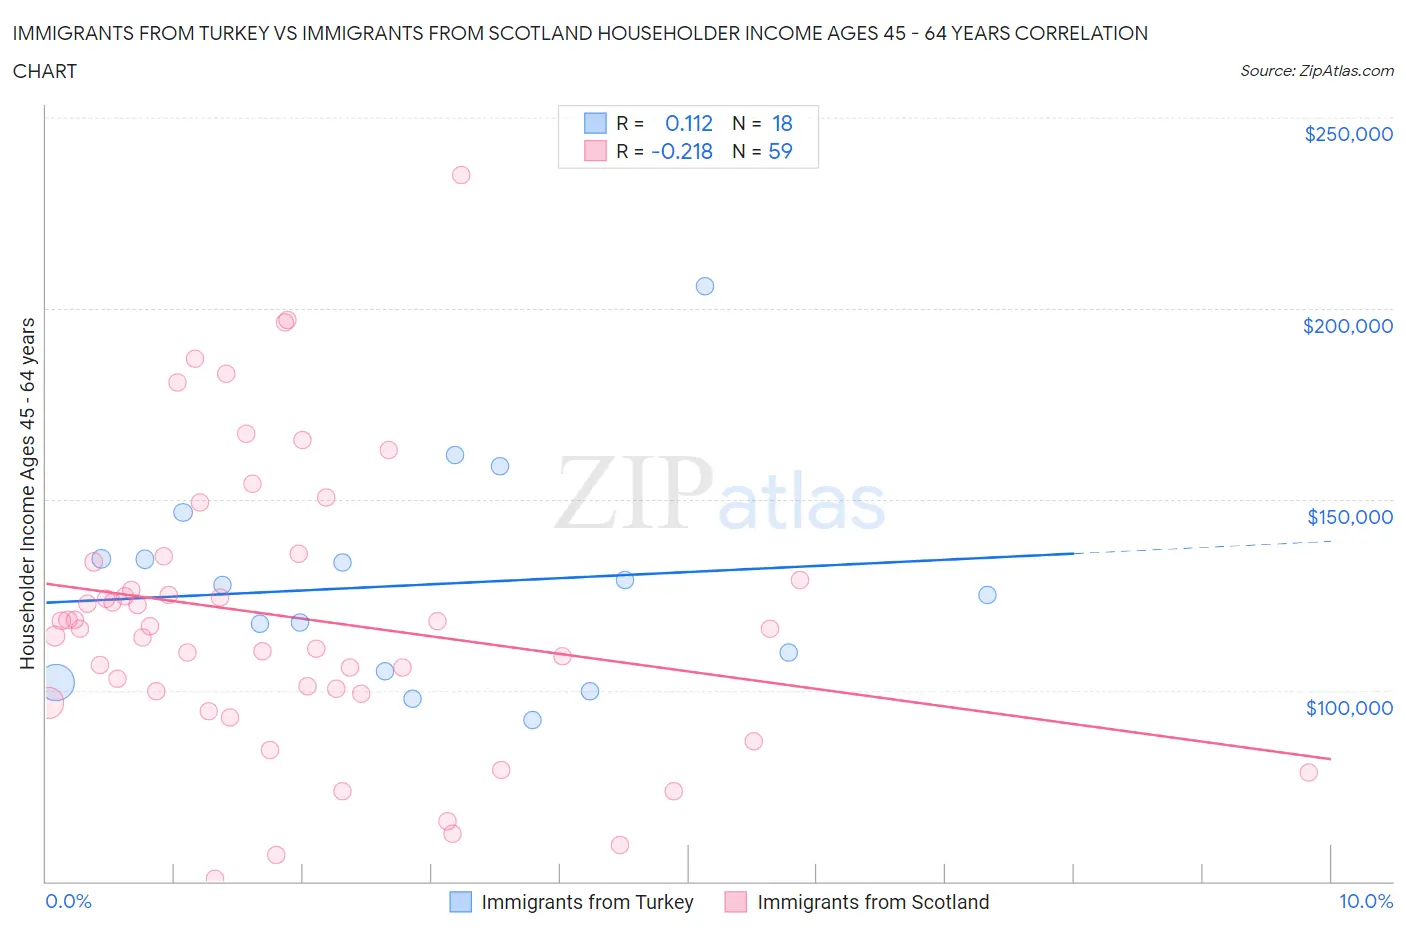 Immigrants from Turkey vs Immigrants from Scotland Householder Income Ages 45 - 64 years